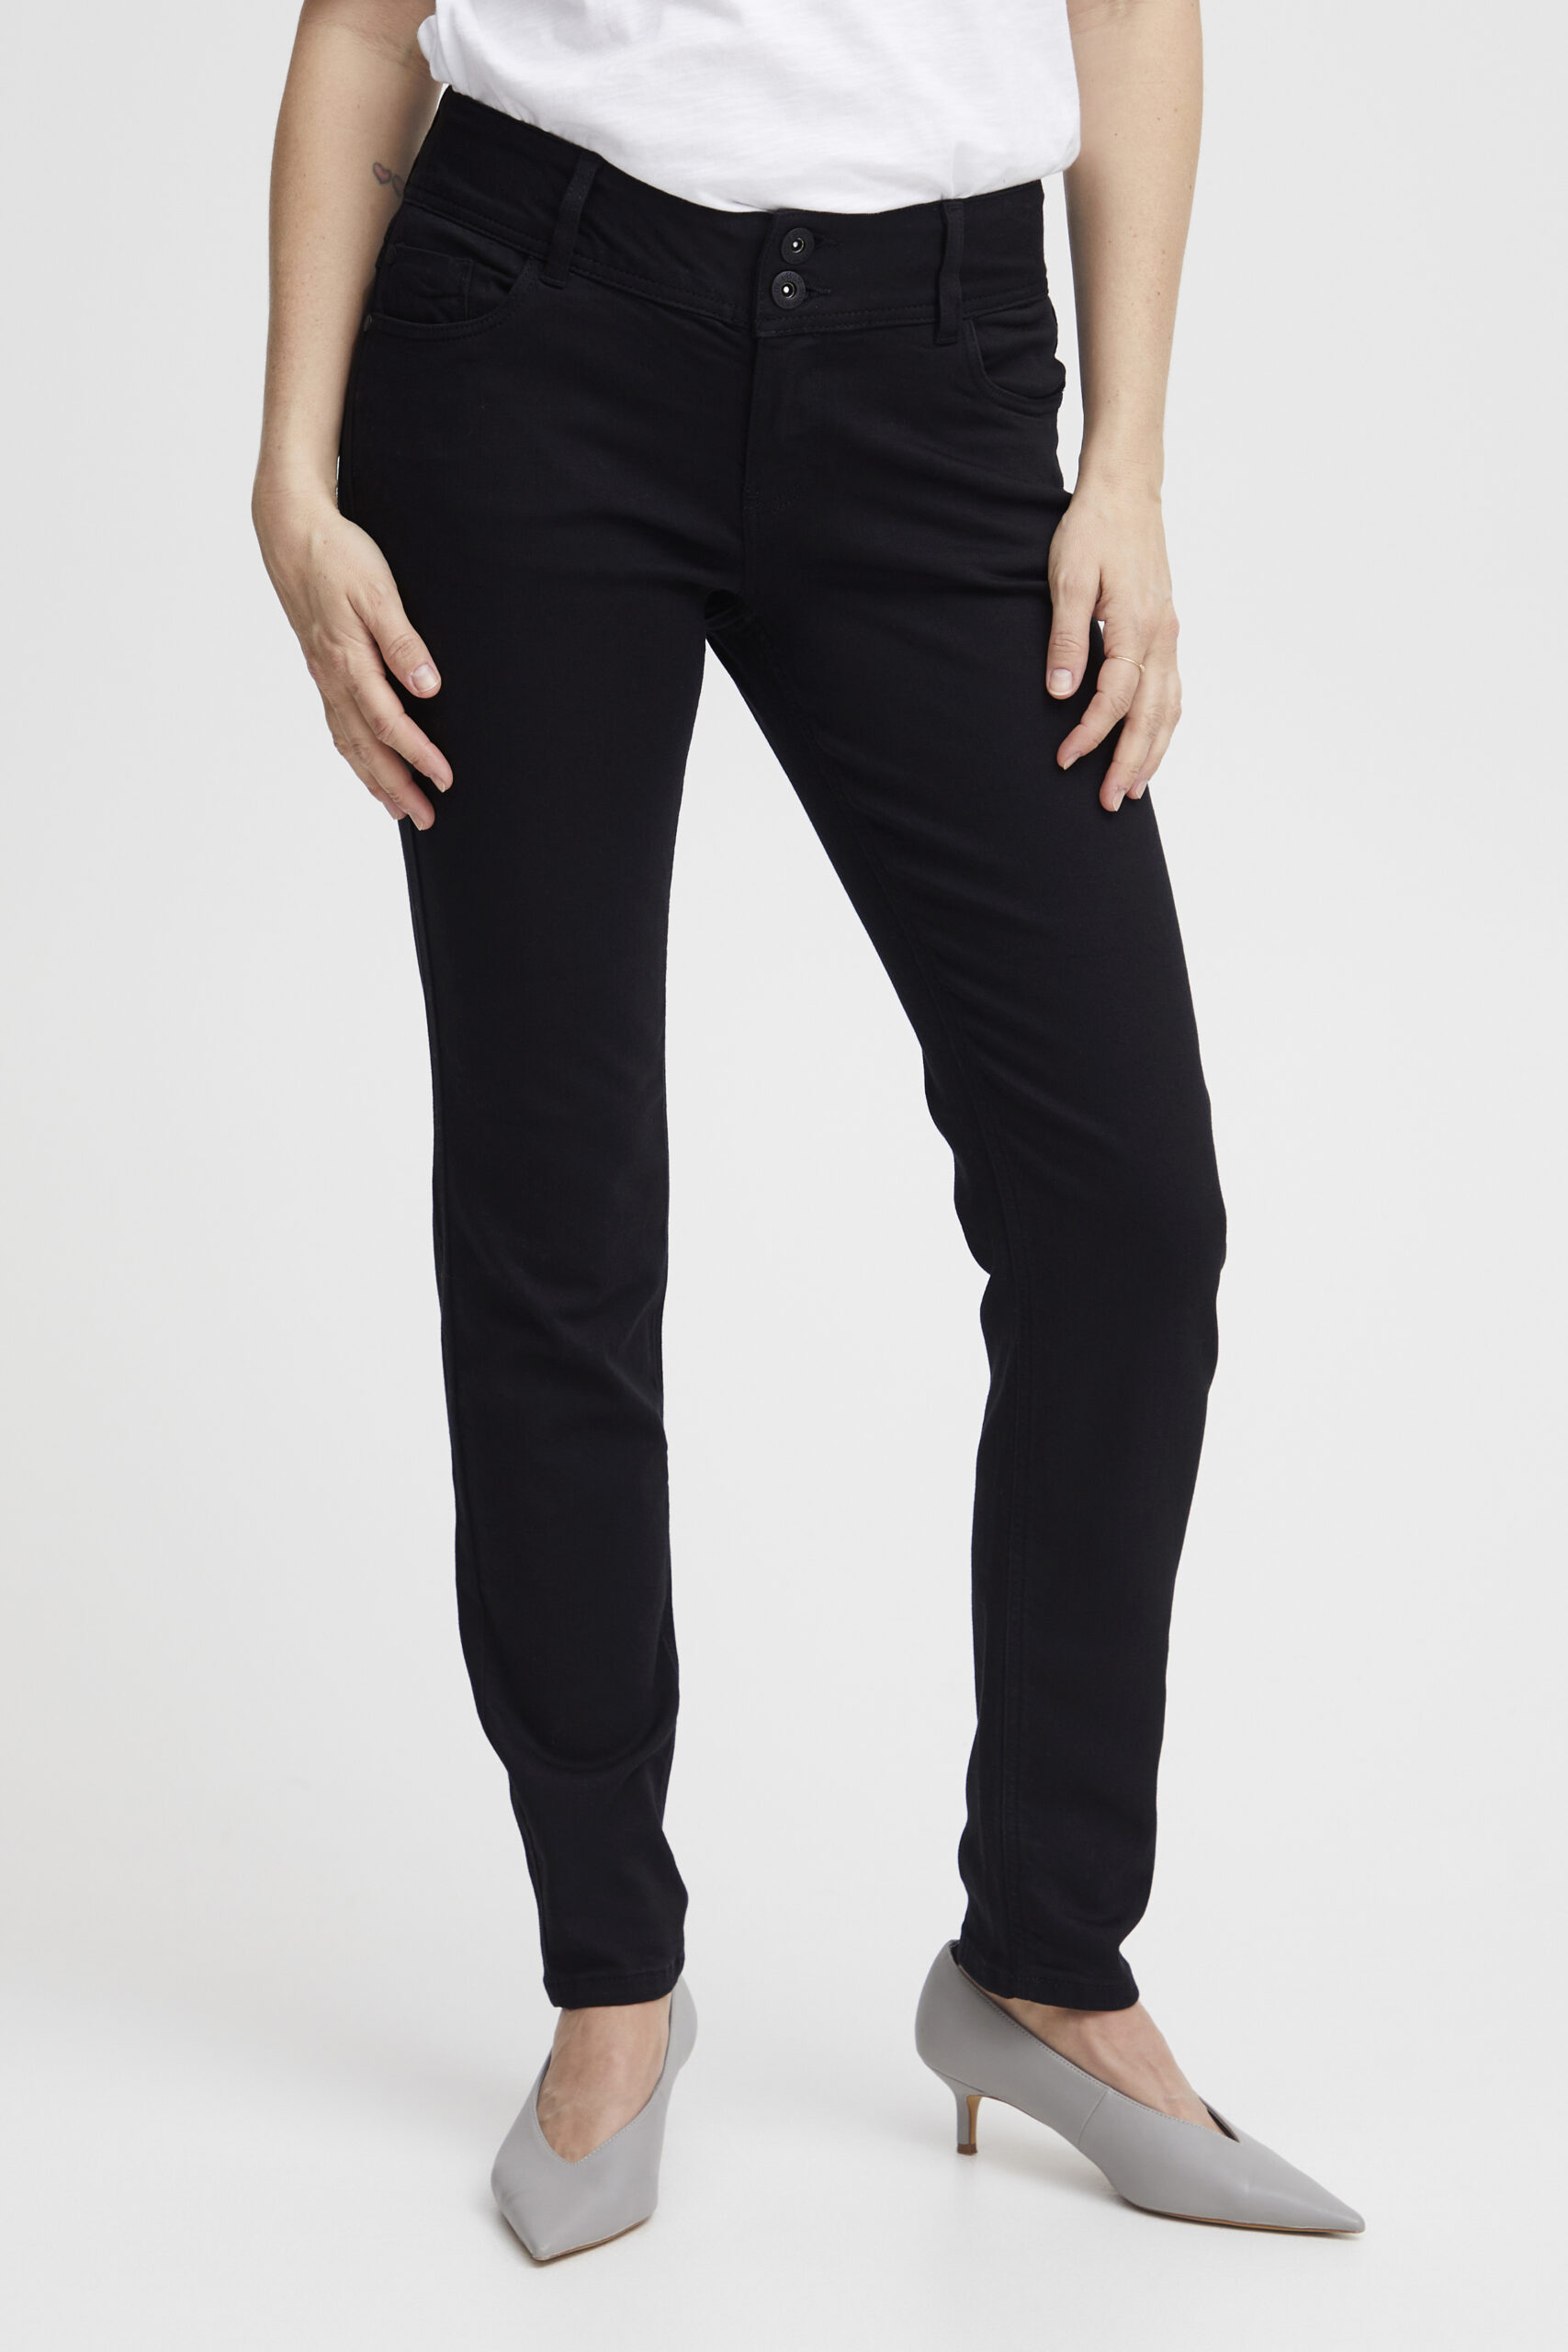 Suzy Black Curved Skinny Leg front